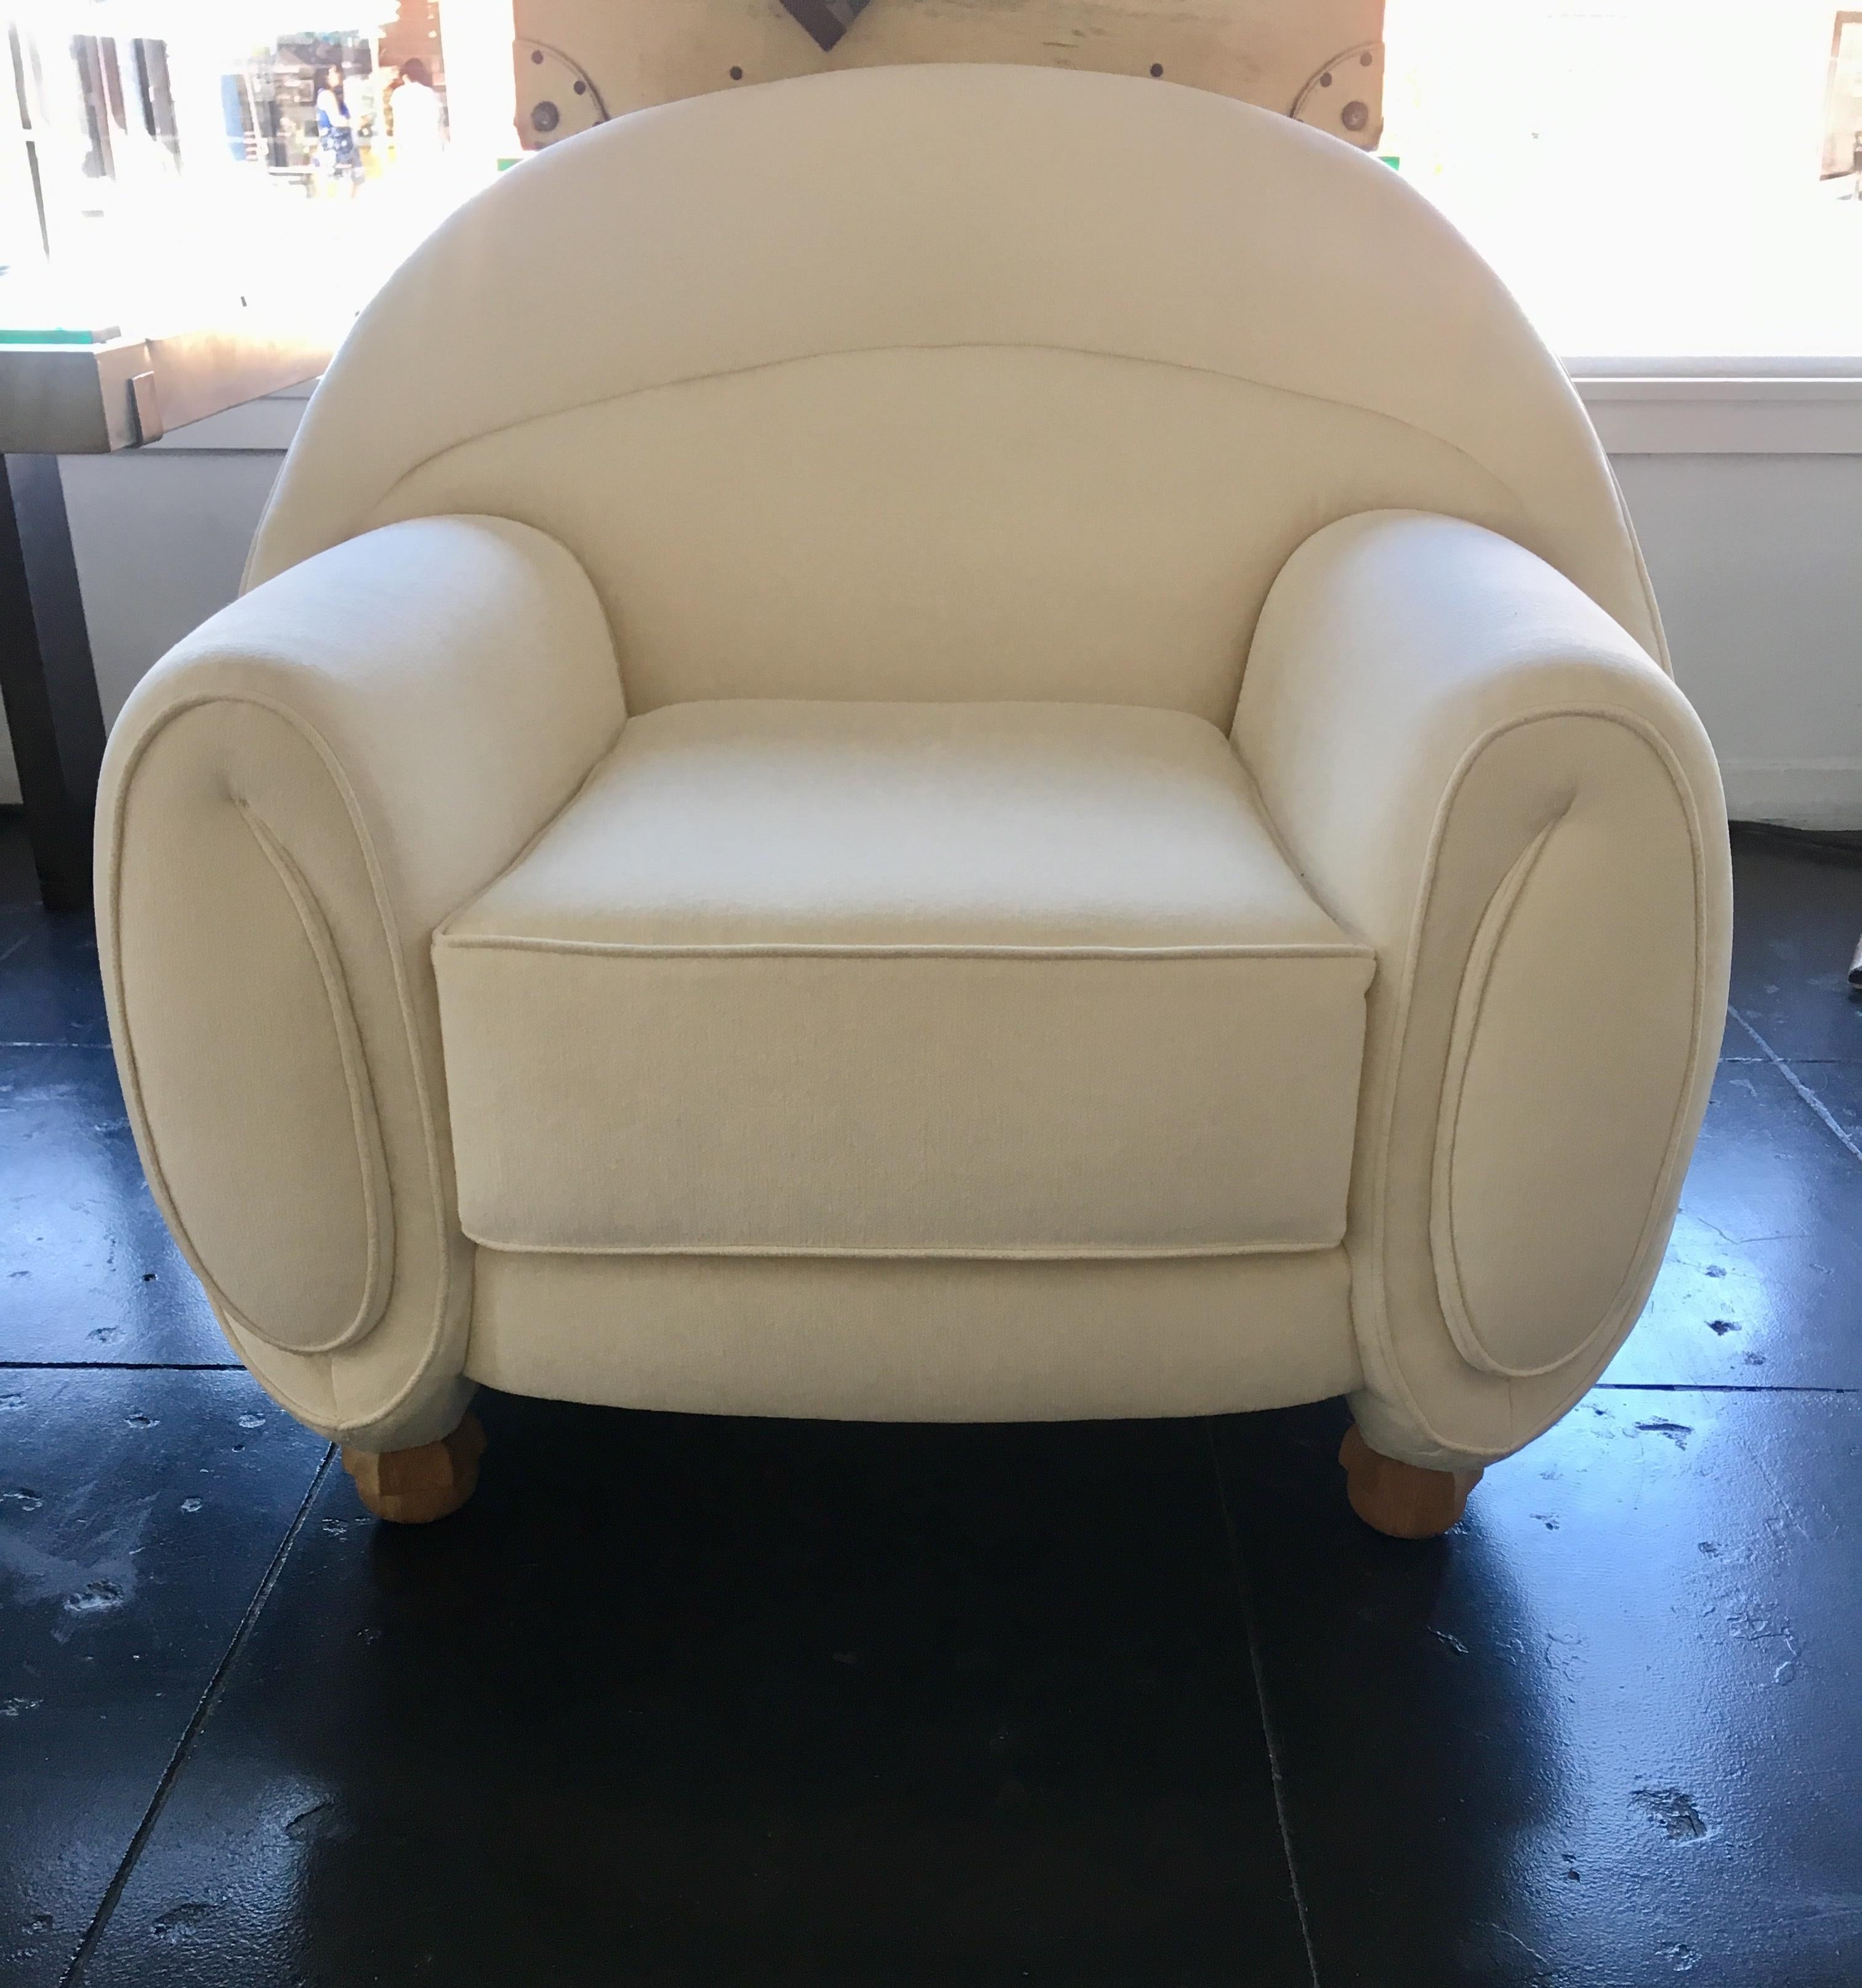 Rare Pierre Chareau Model No. MF219 Armchair, France, circa 1925. See detail image of original chair.
Original upholstery was in very bad condition, it has been reupholstered with brand new white mohair fabric.